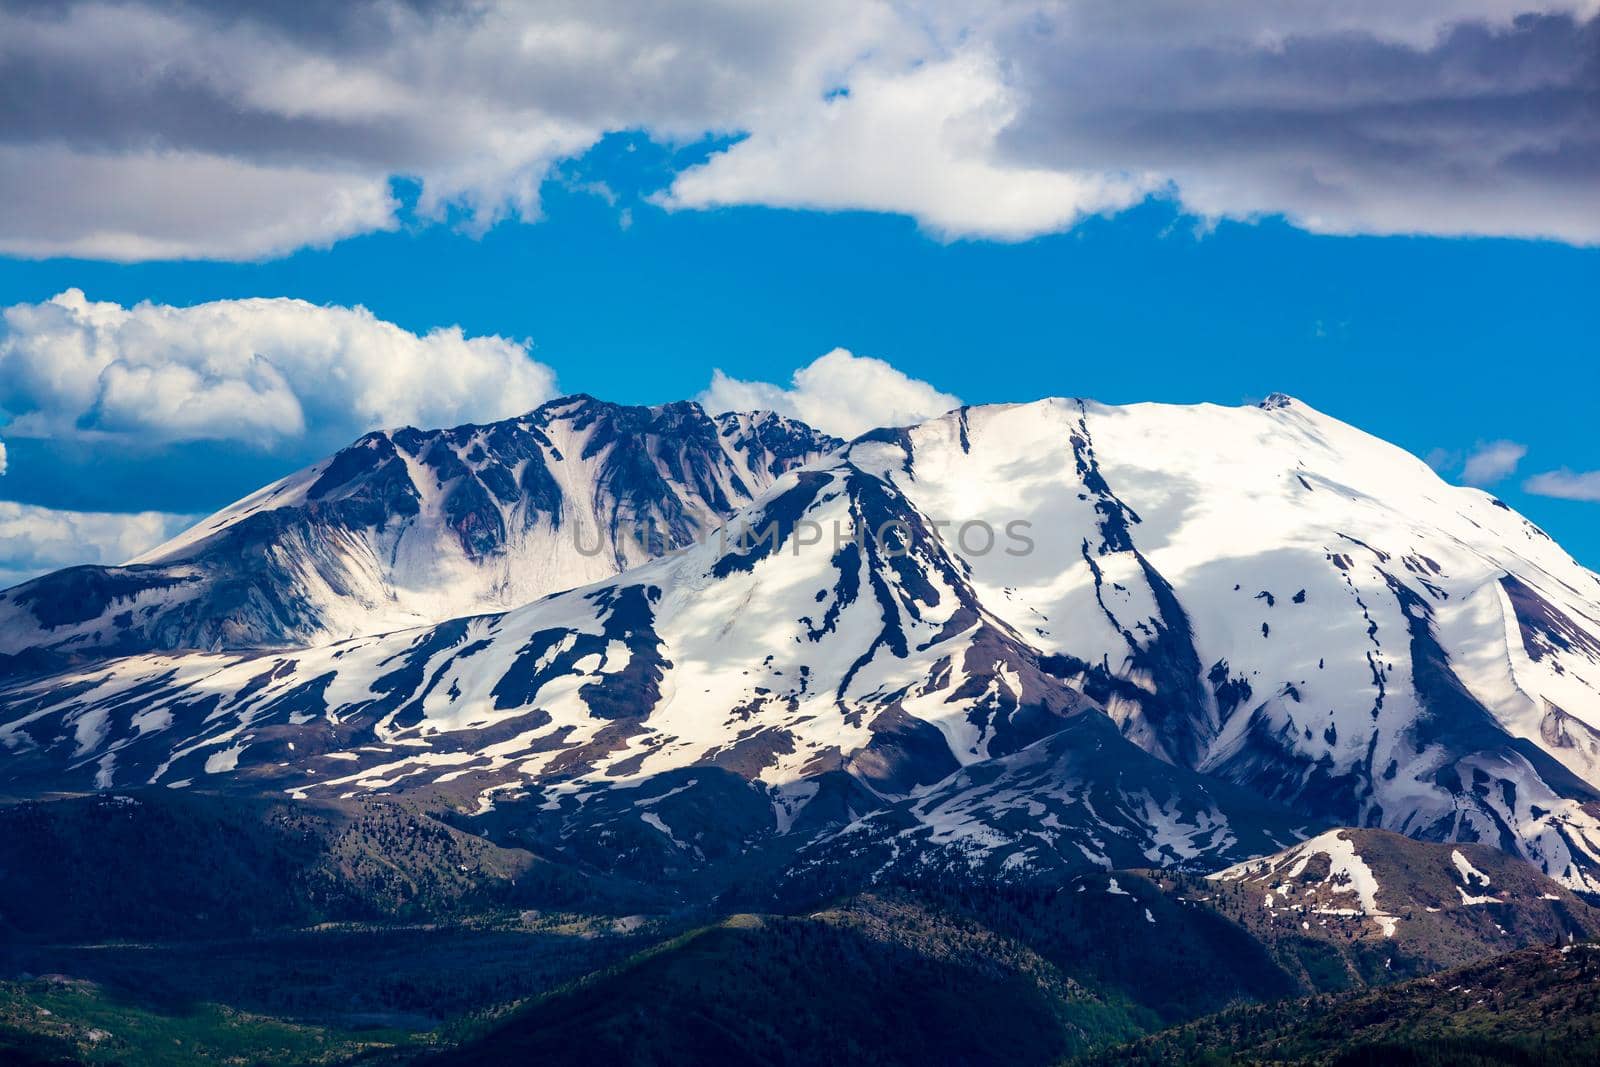 Mount St. Helens with some snow patches, in early summer